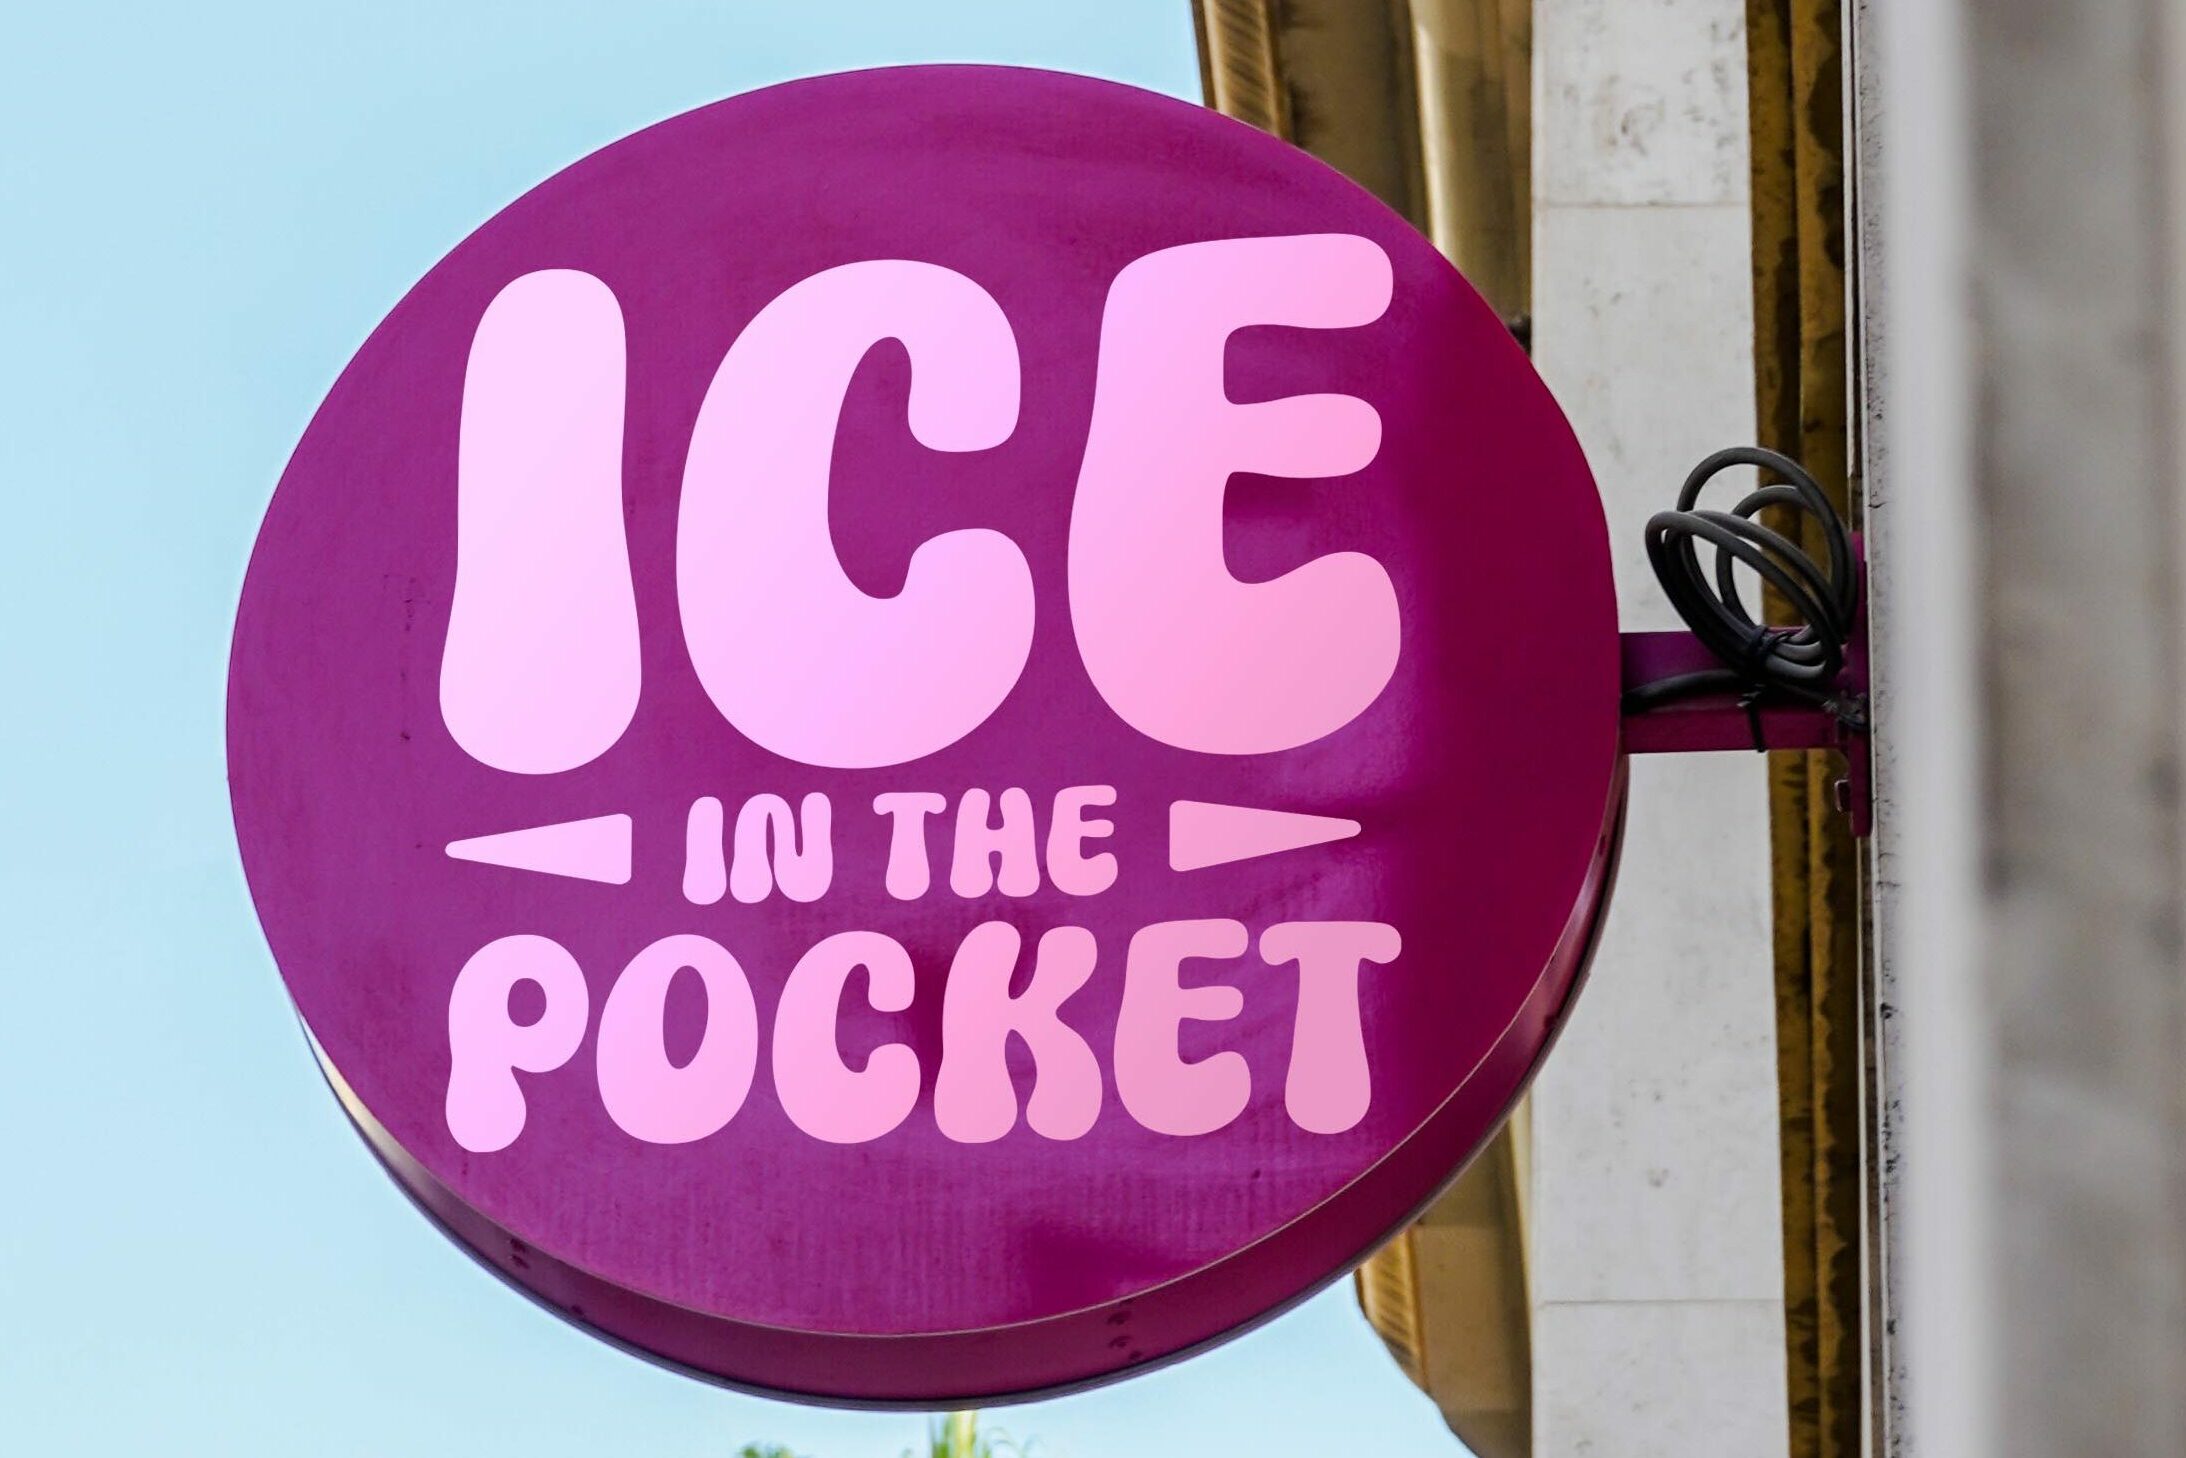 Ice in the pocket